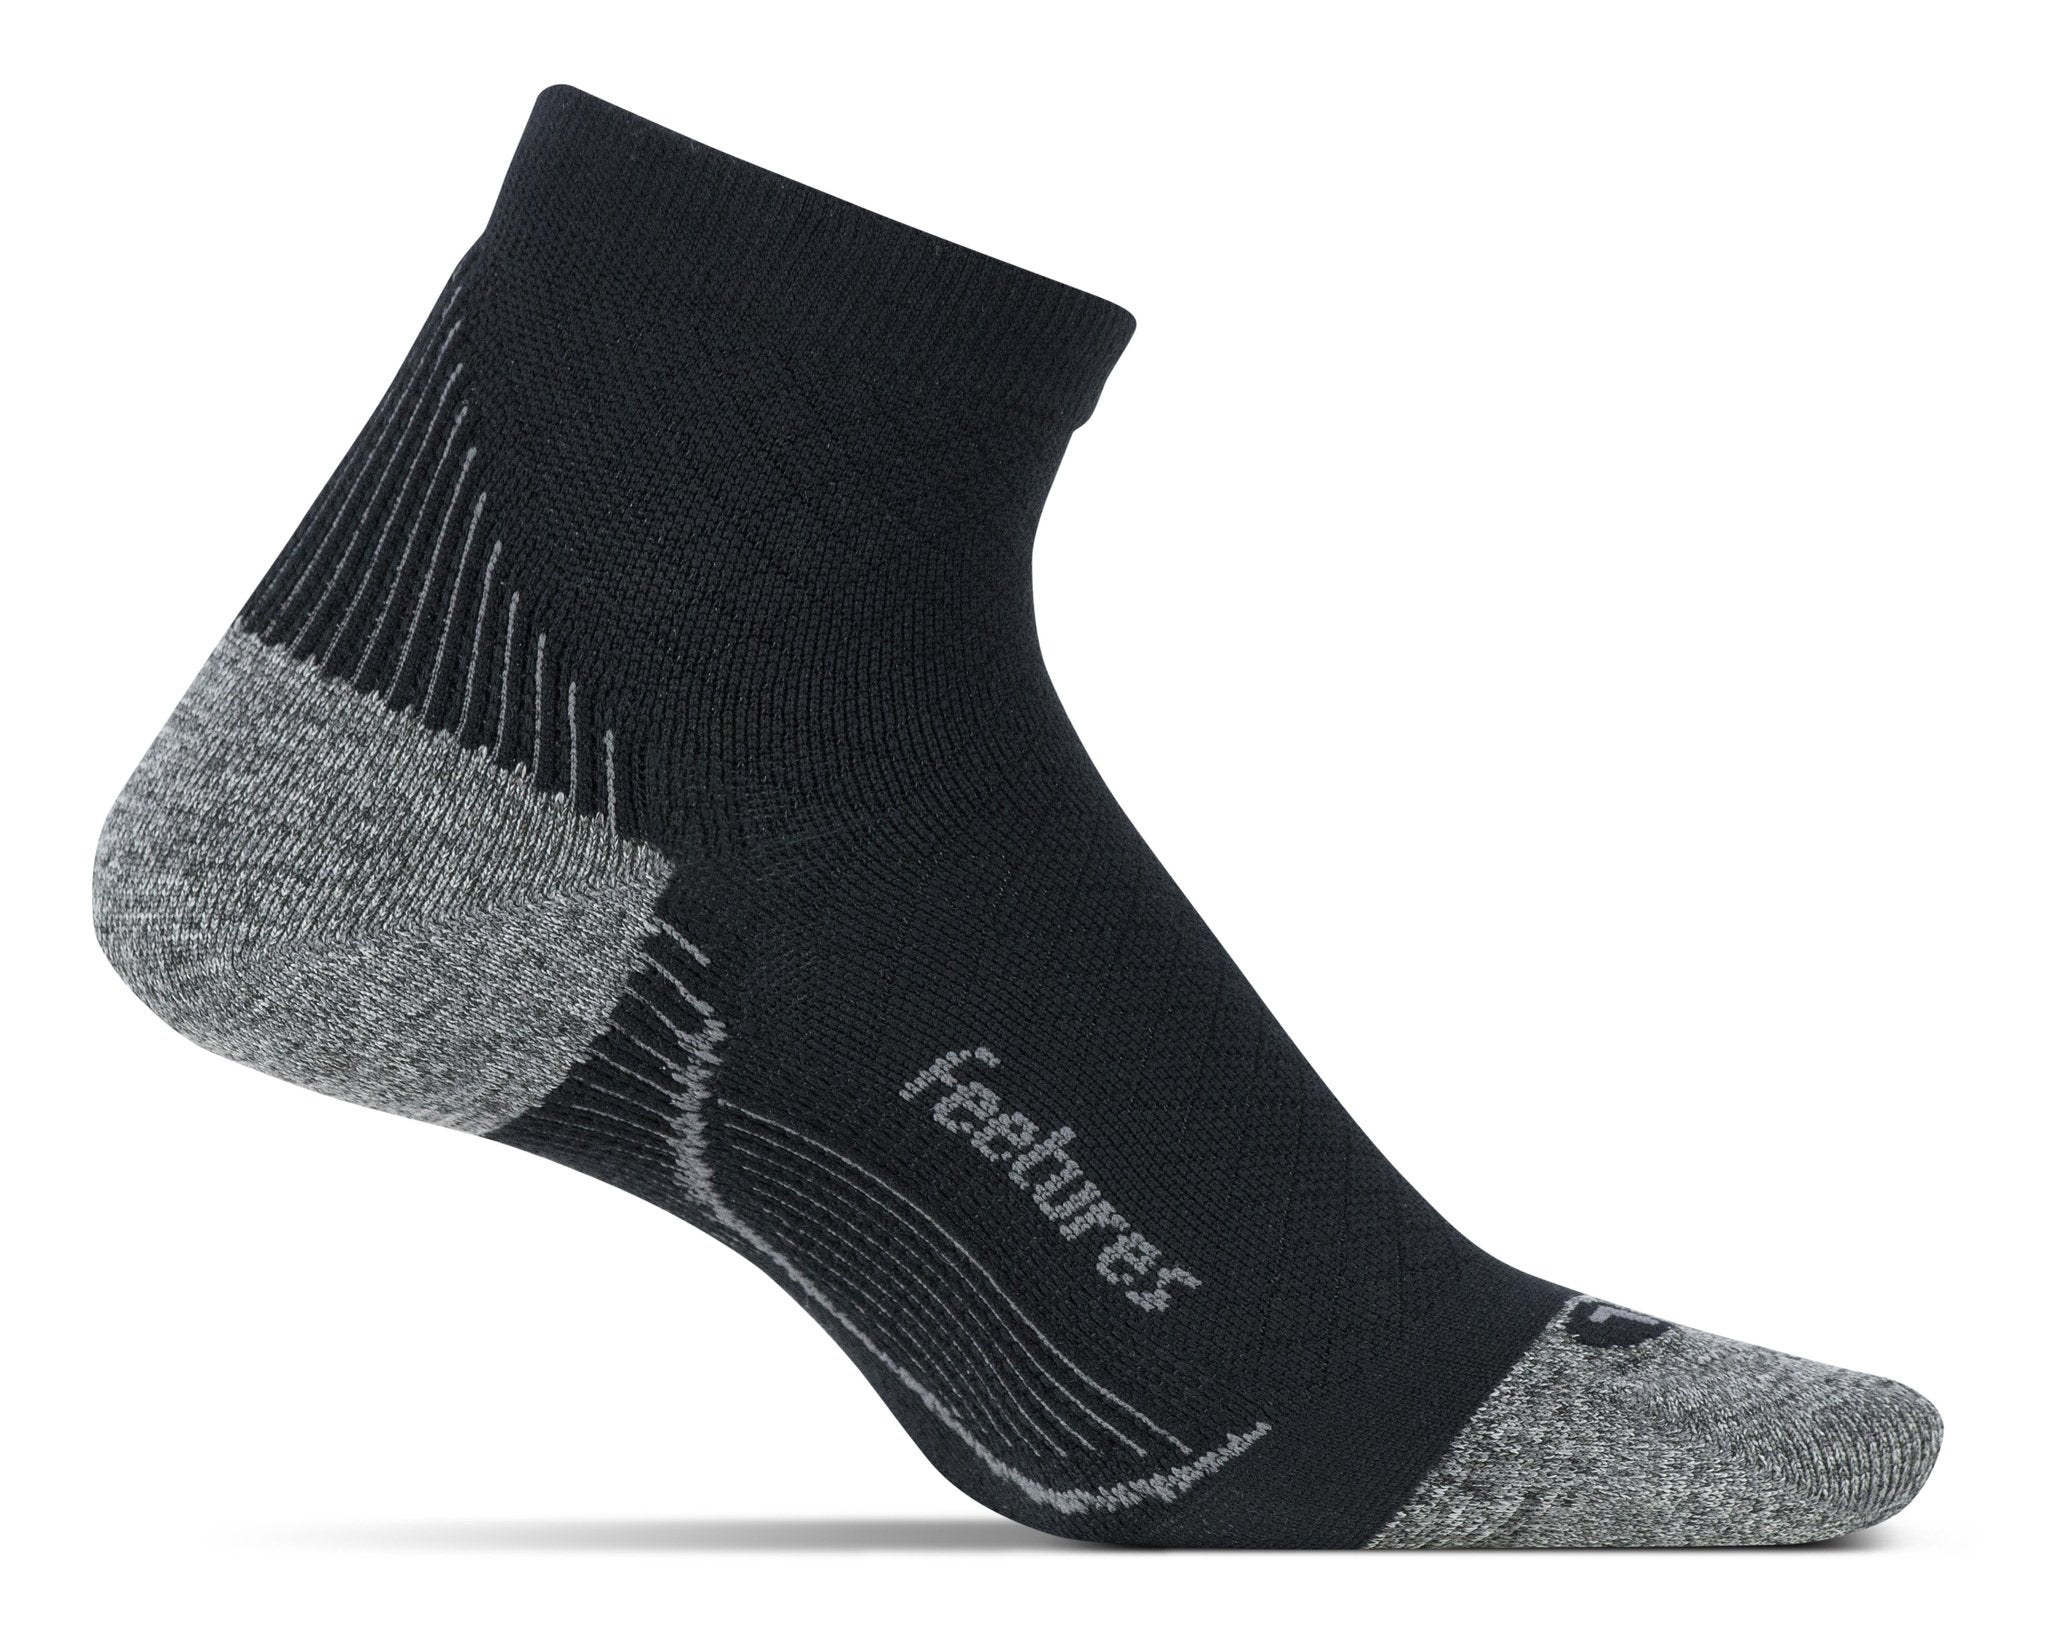 A medial view of the Feetures Plantar Fasciitis Quarter Sock (left foot) in the color black